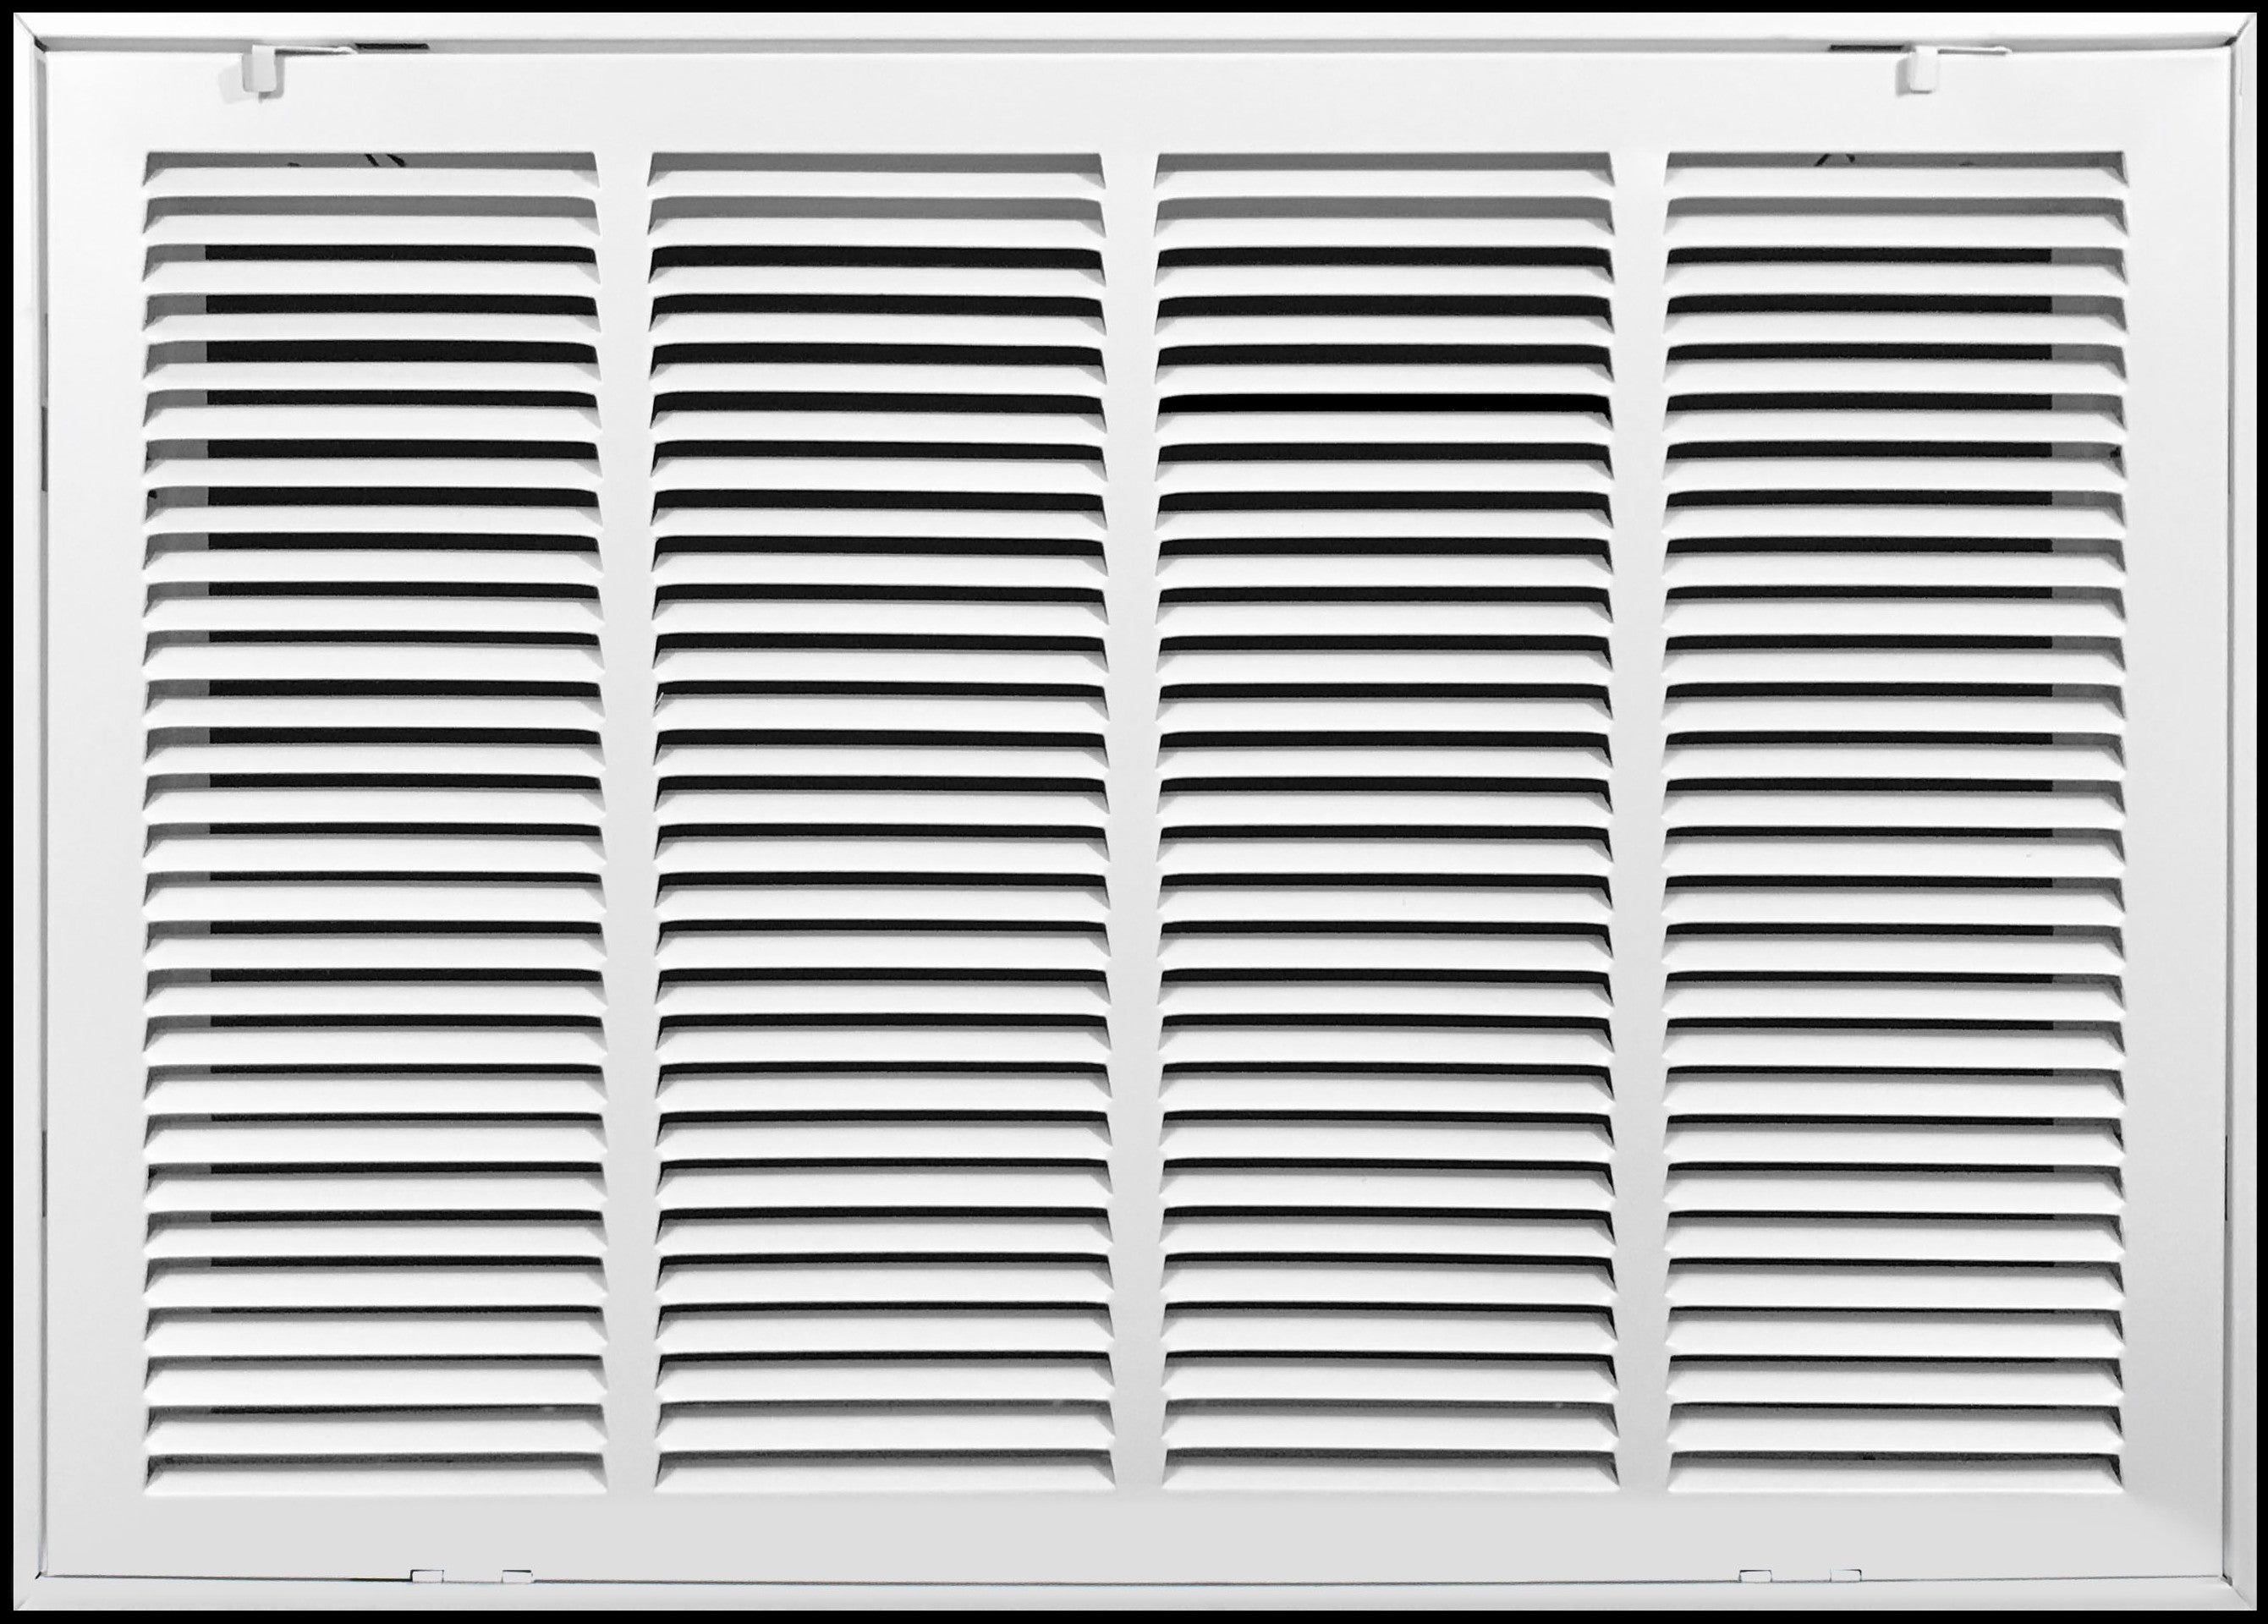 airgrilles 24" x 14" duct opening   steel return air filter grille  fixed hinged  for sidewall and ceiling hnd-fx-1rafg-wh-24x14 752505984537 - 1